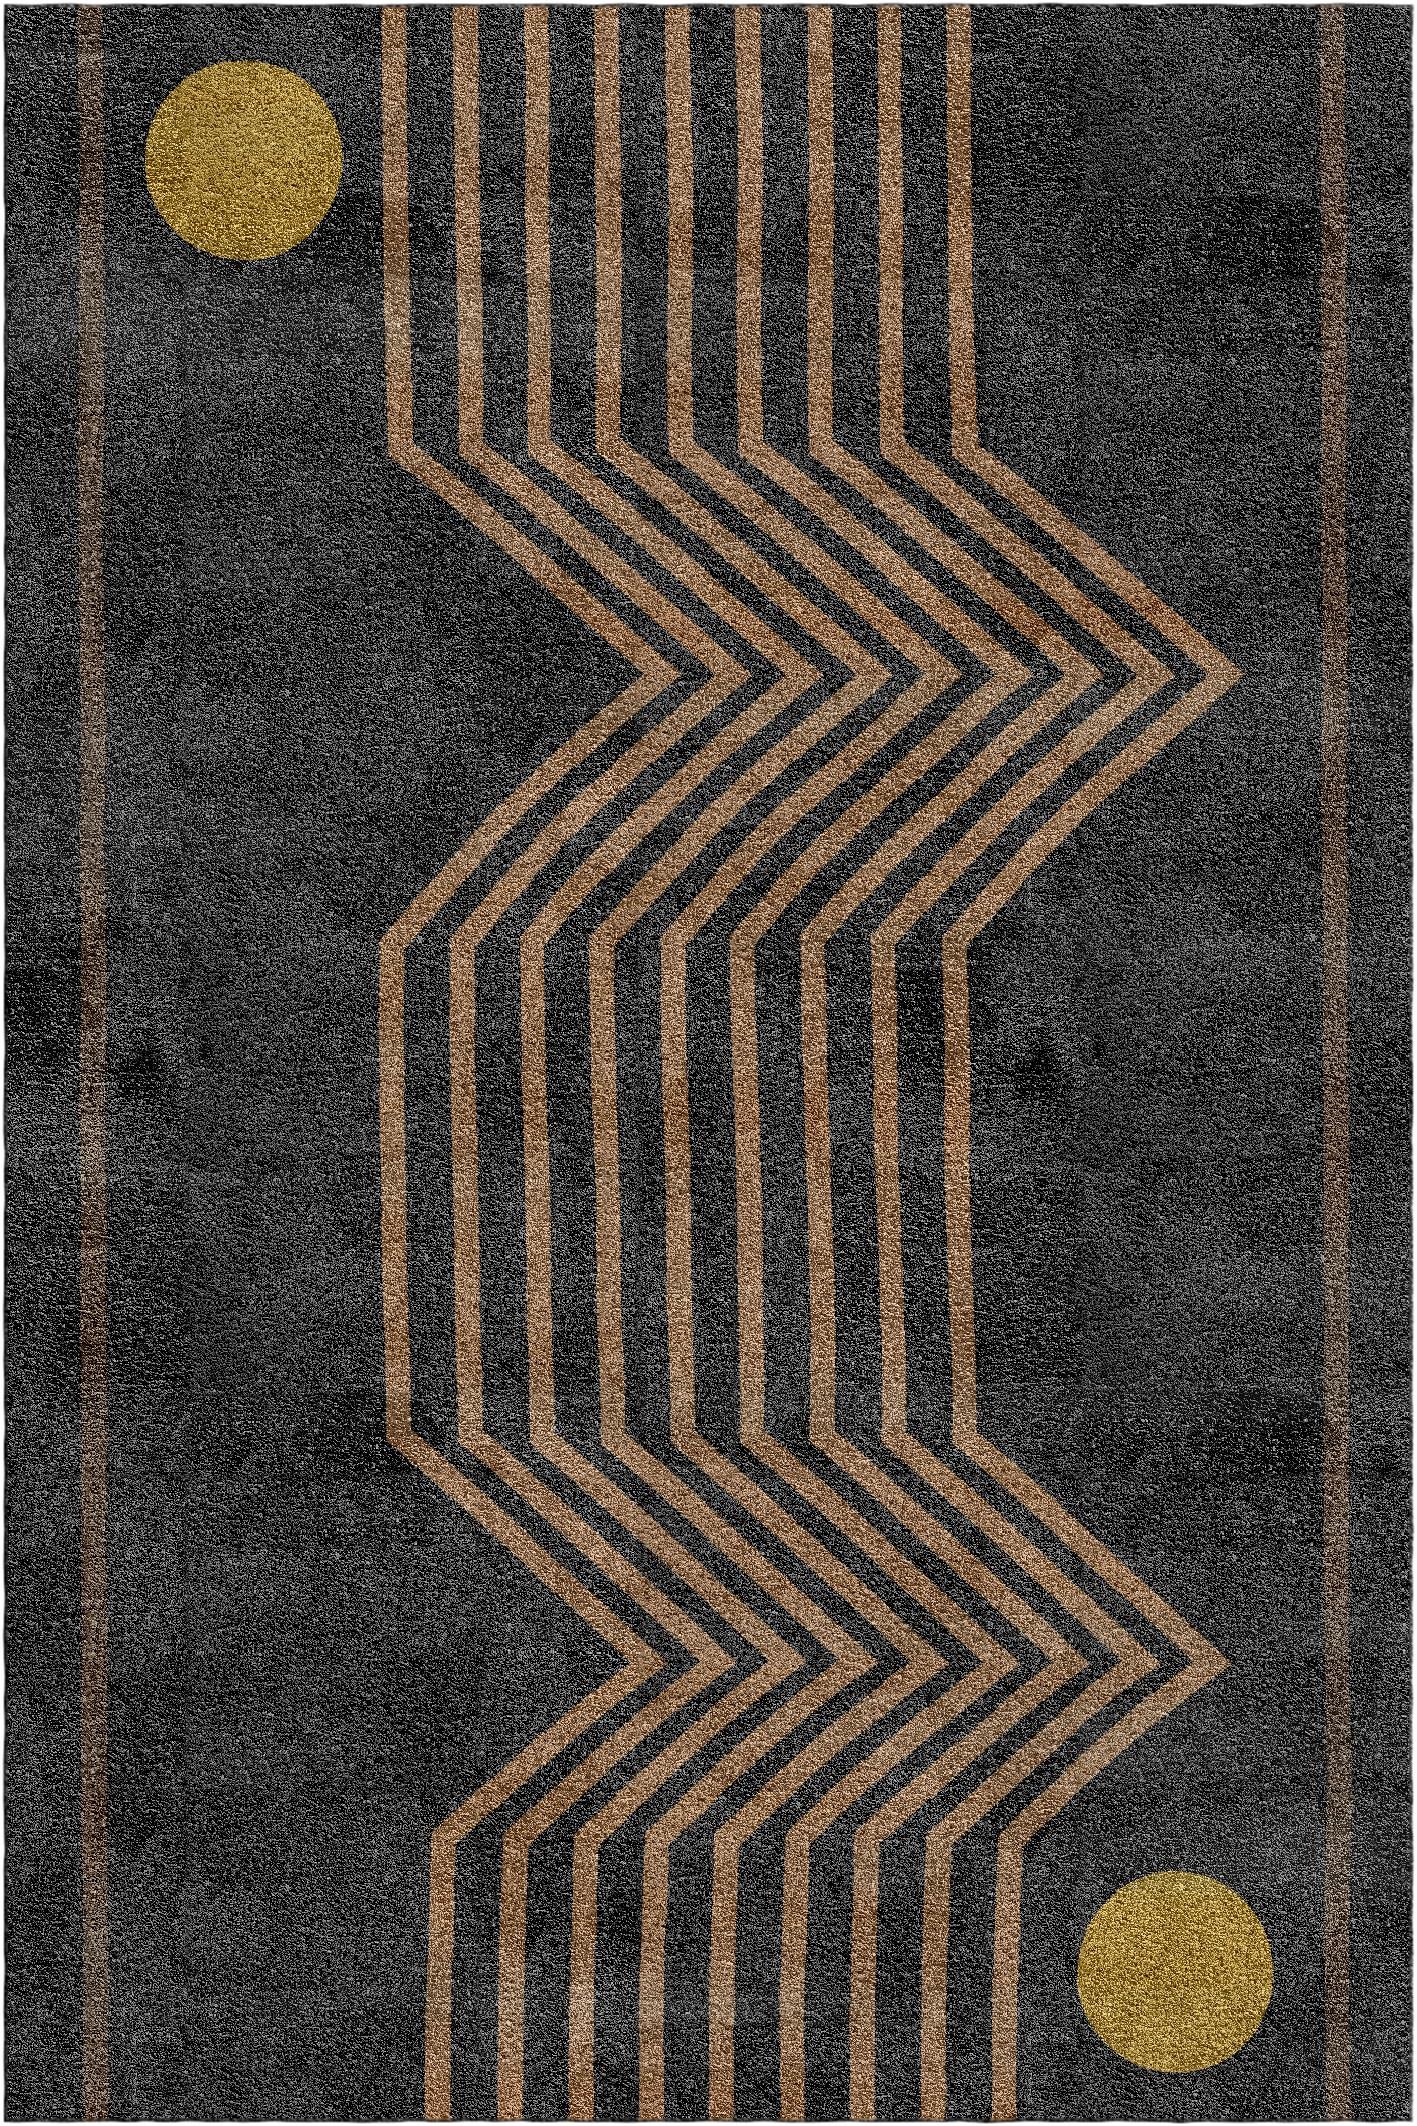 Futuro rug VI by Vanessa Ordoñez
Dimensions: D 300 x W 200 x H 1.5 cm
Materials: bamboo fibers and linen

A striking design by Vanessa Ordoñez, this gorgeous rug will add sophistication and allure in any contemporary home. Hand-tufted in Europe